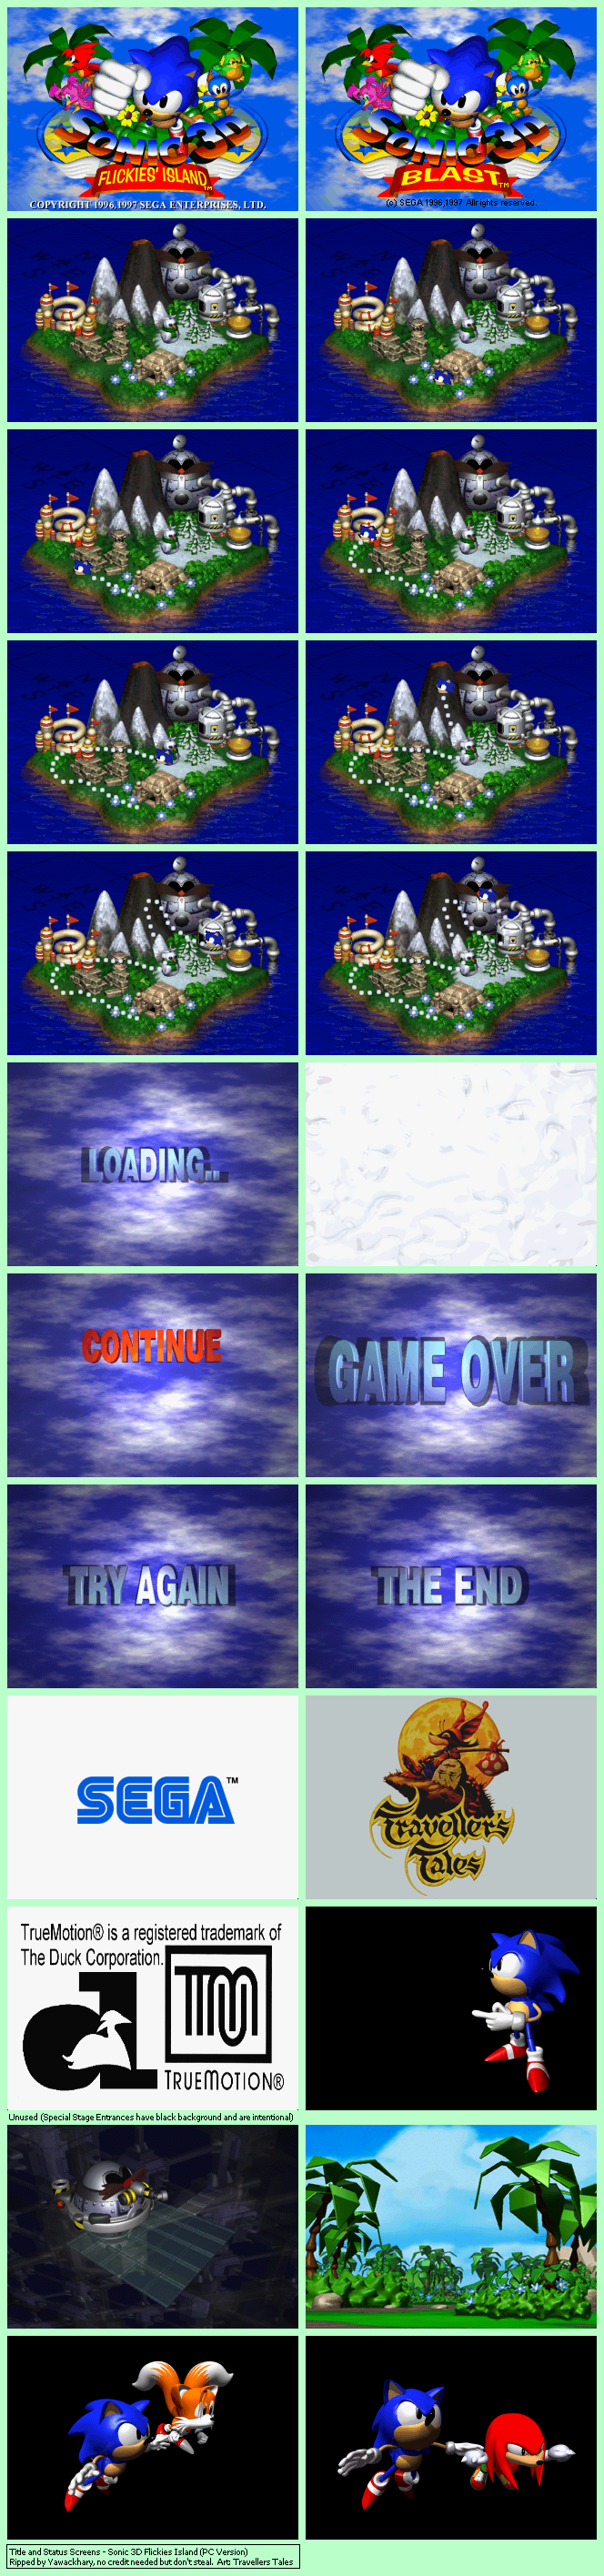 Sonic 3D: Flickies Island - Title and Status Screens